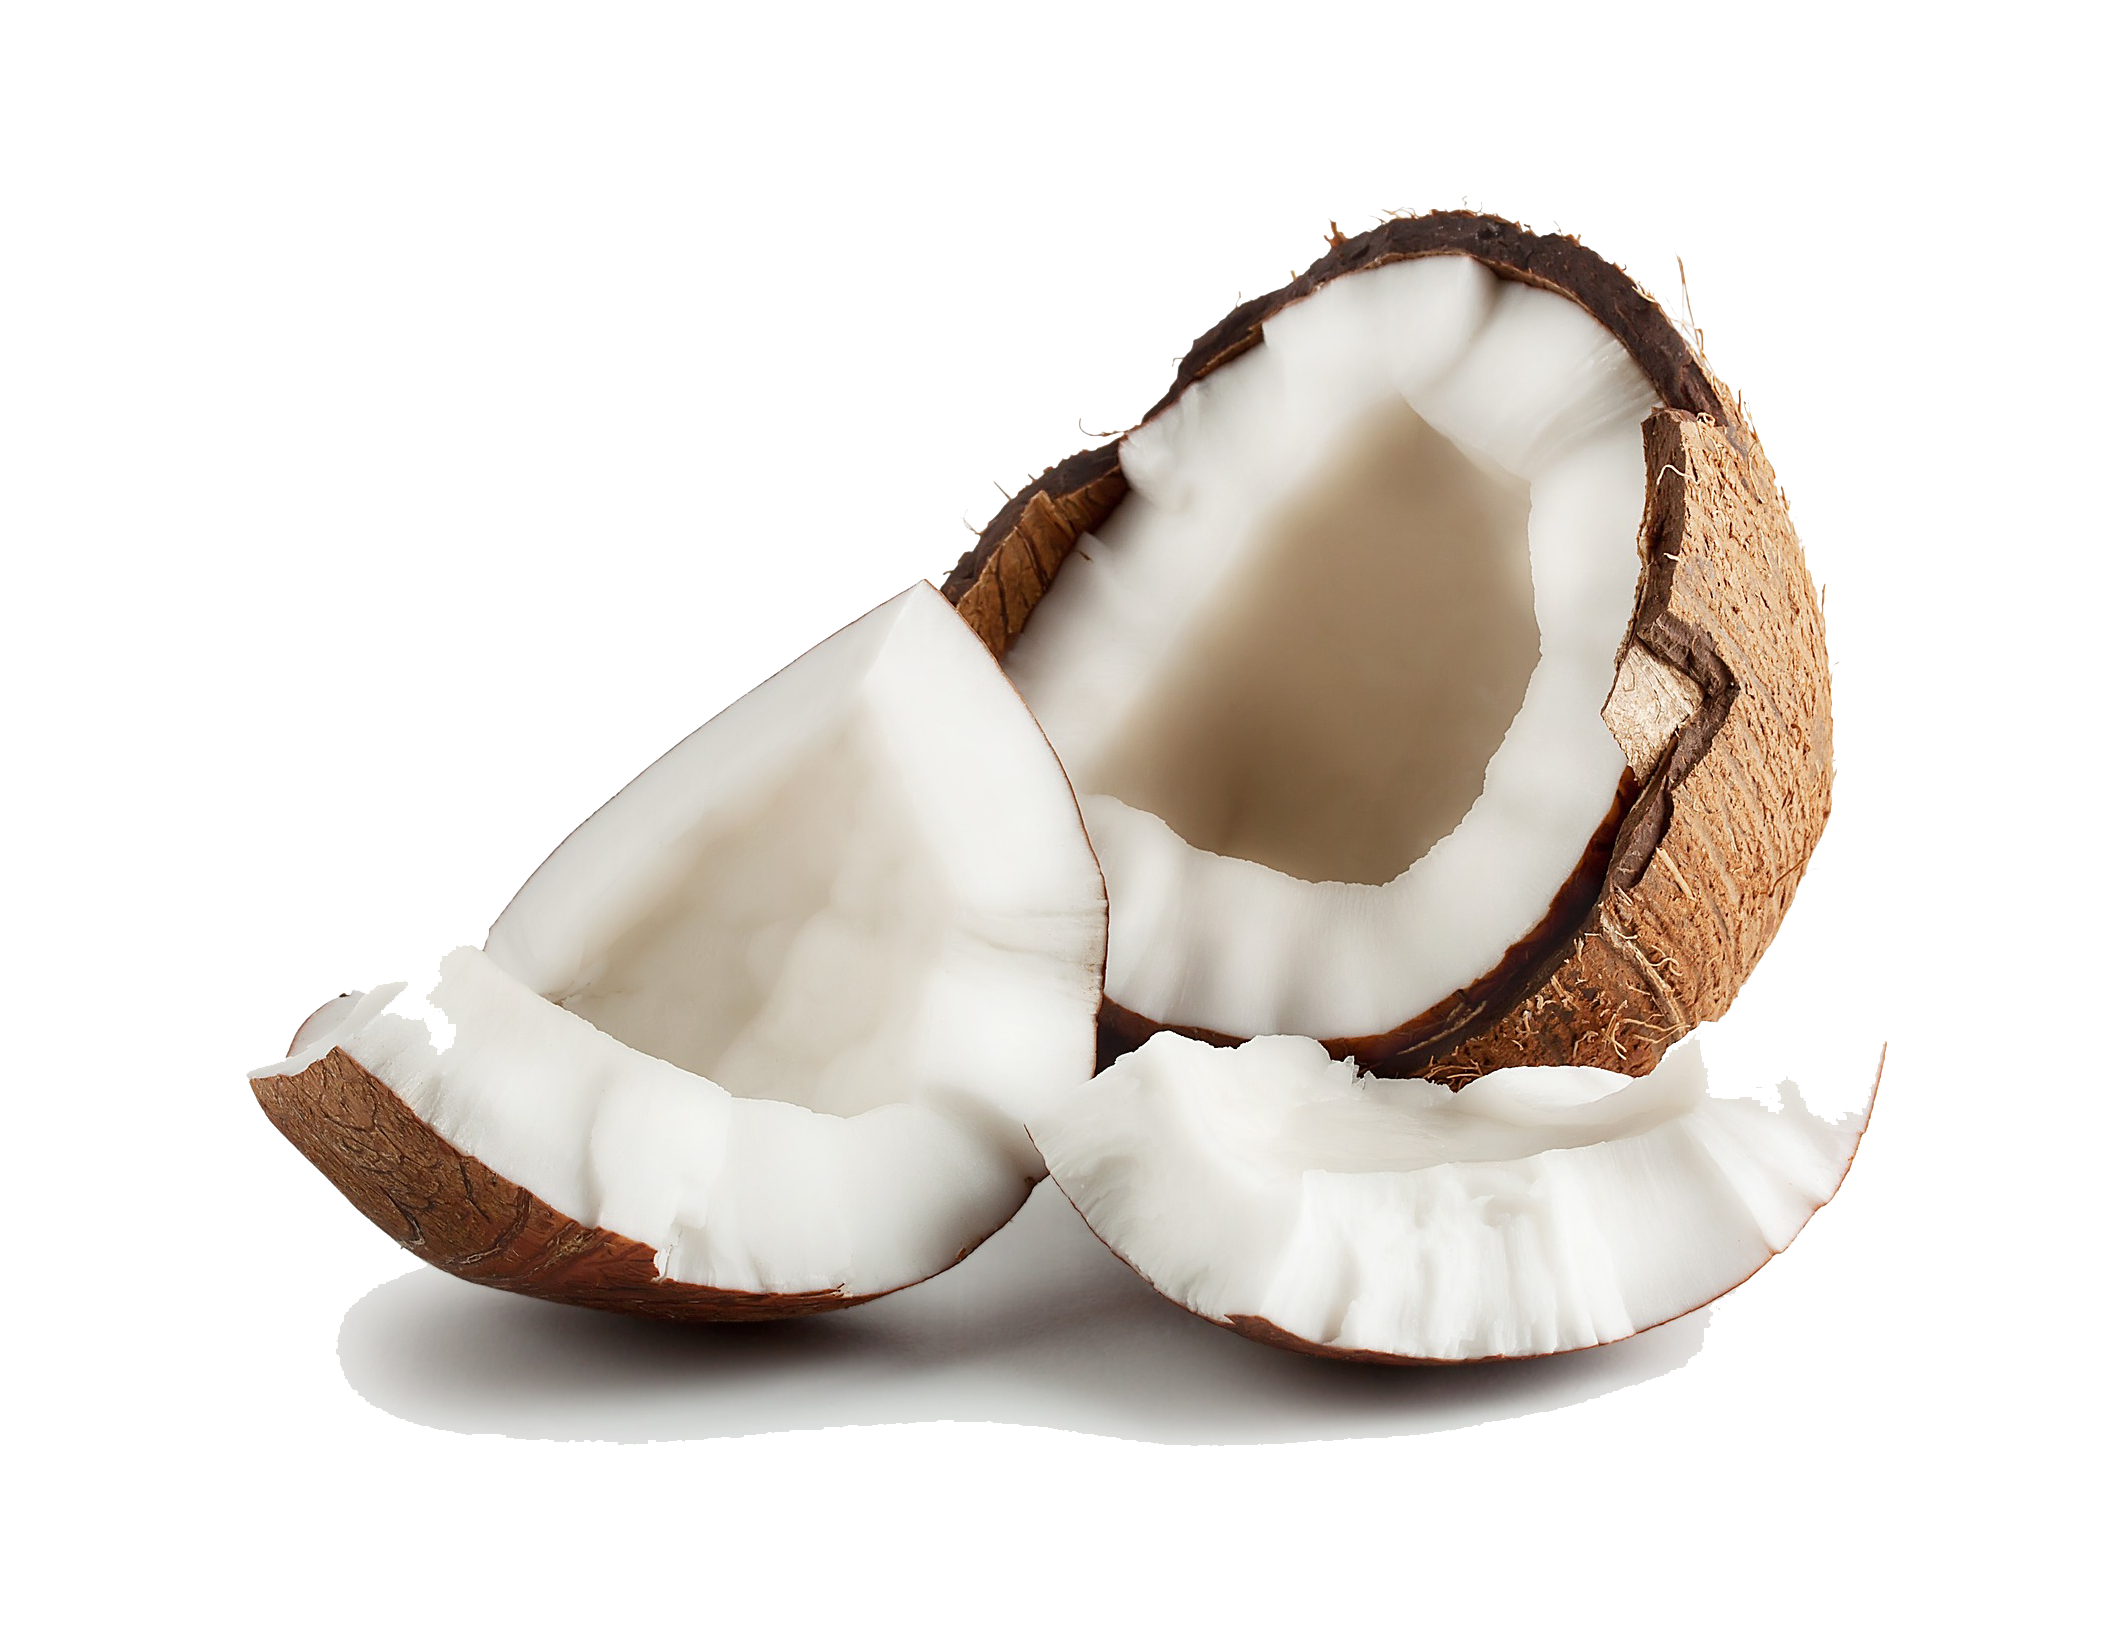 Coconut PNG Image in Transparent